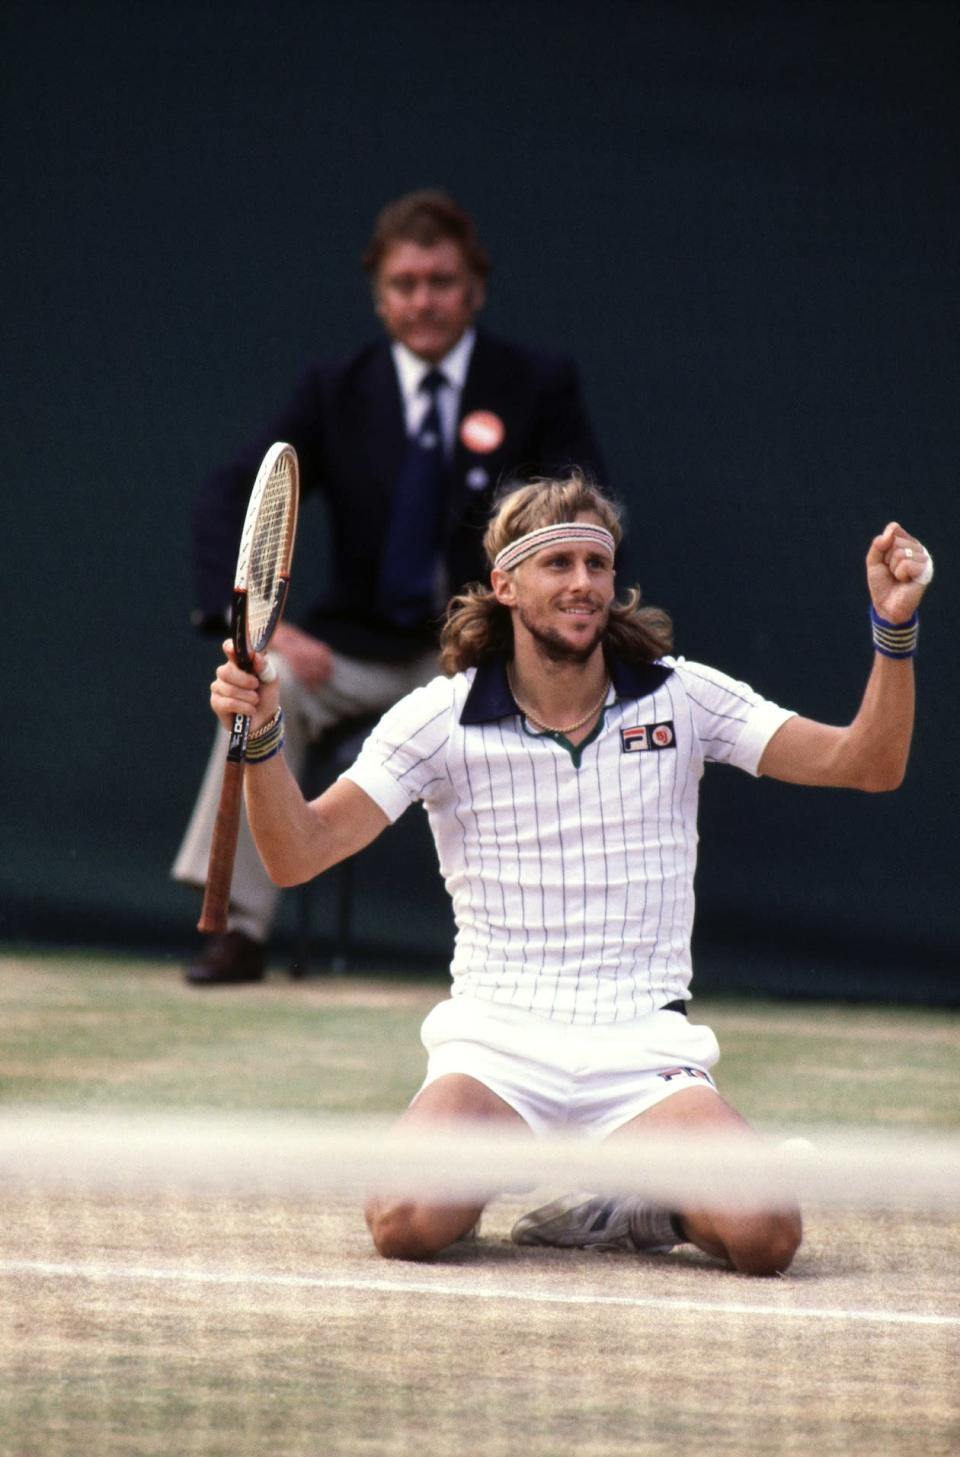 <p class="MsoNormal"><span>One of the most famous tennis rivalries in history pitted Bjorn Borg against John McEnroe. Borg won his fifth consecutive Wimbledon final in <b>1980</b>, beating McEnroe in what is regarded as one of the best tennis matches ever. In <b>1981,</b> McEnroe took revenge and beat Borg in the final but was most famous for shouting “You cannot be serious?!” and “Didn’t you see the chalk dust?” </span></p>